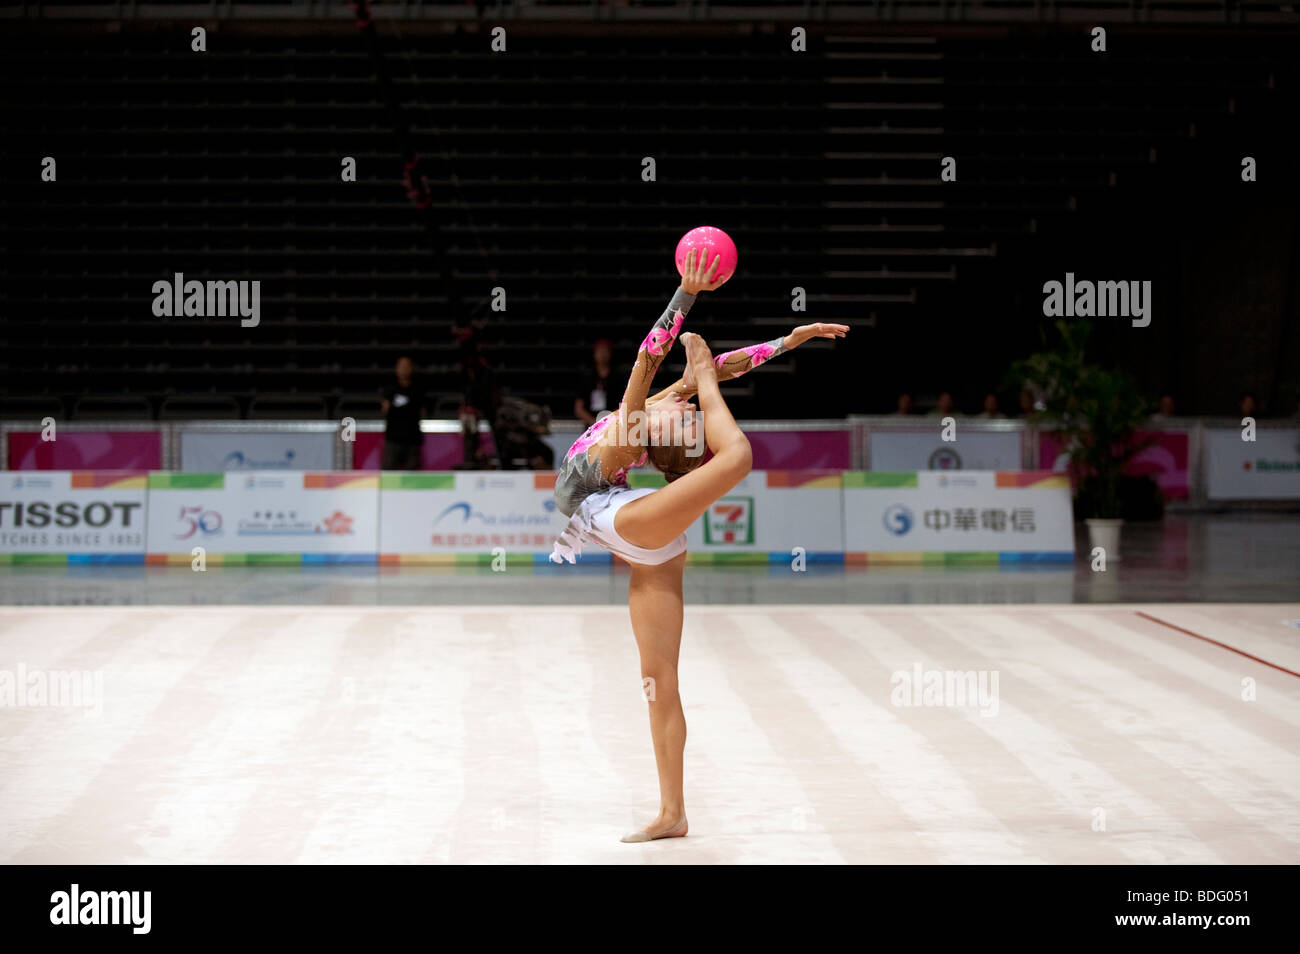 Melitina Staniouta of Belarus competing in rhythmic gymnastics competition, World Games, Kaohsiung, Taiwan, July 17, 2009. Stock Photo